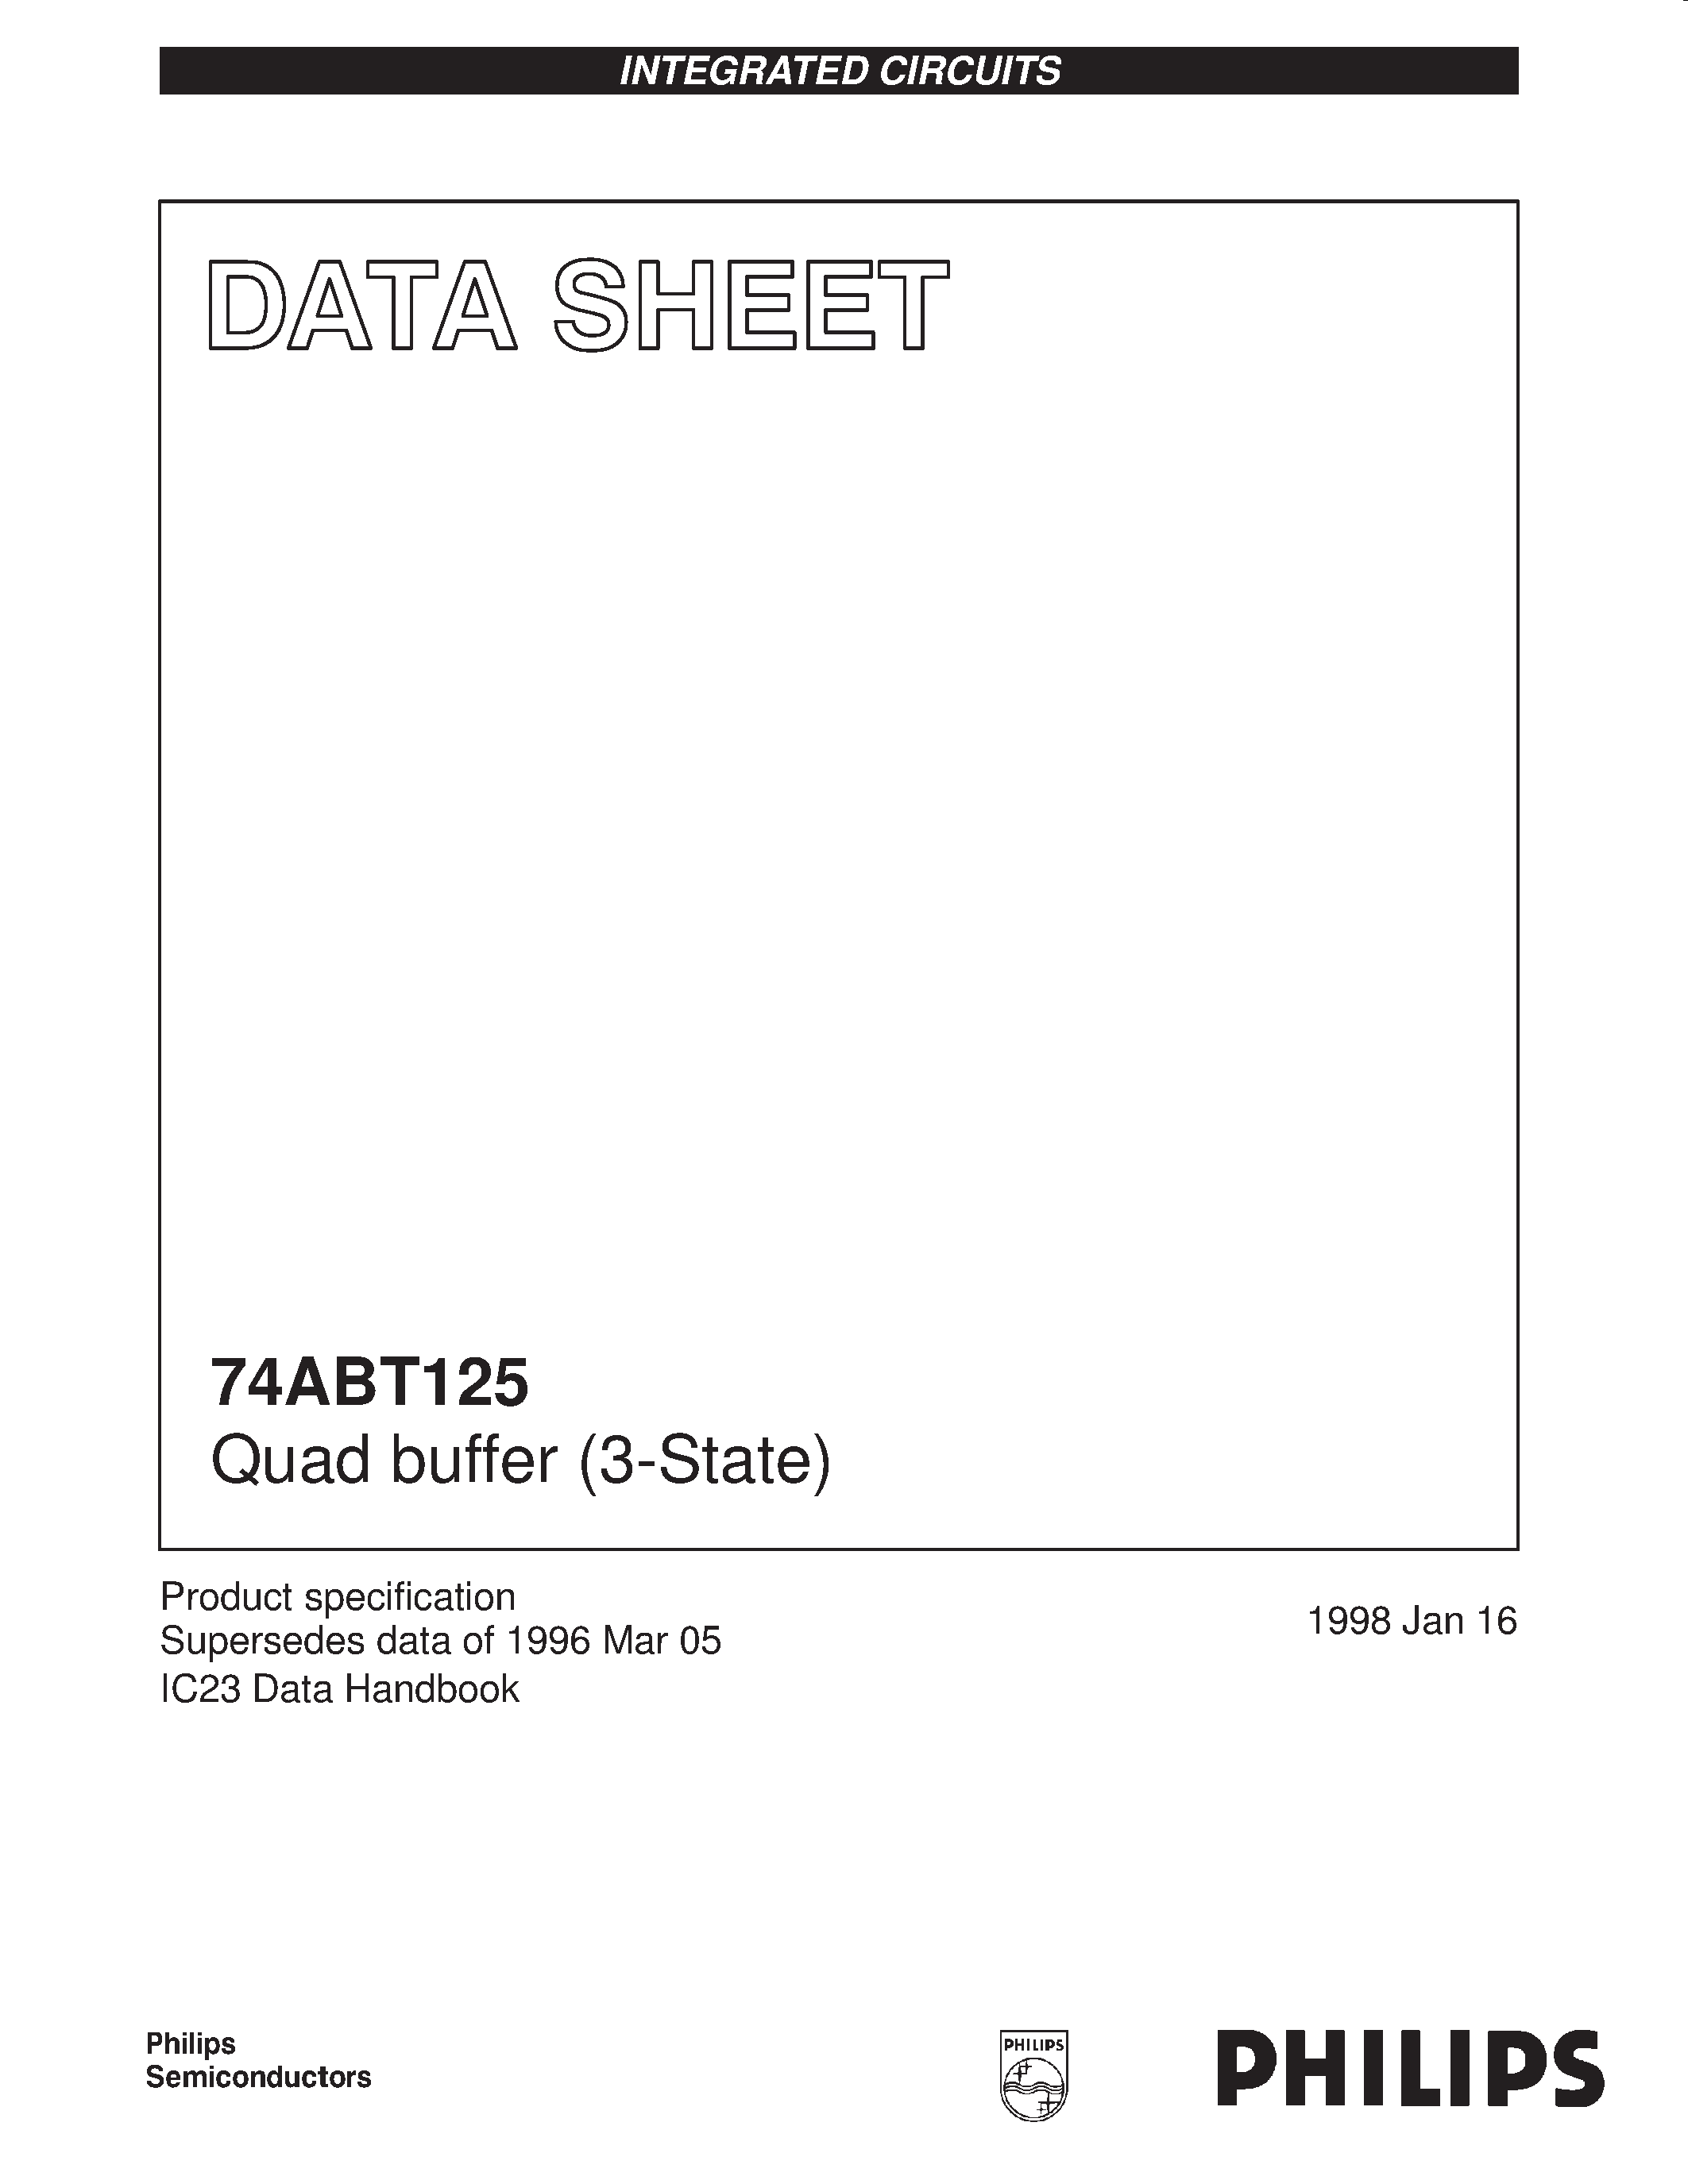 Datasheet 74ABT125 - Quad buffer 3-State page 1